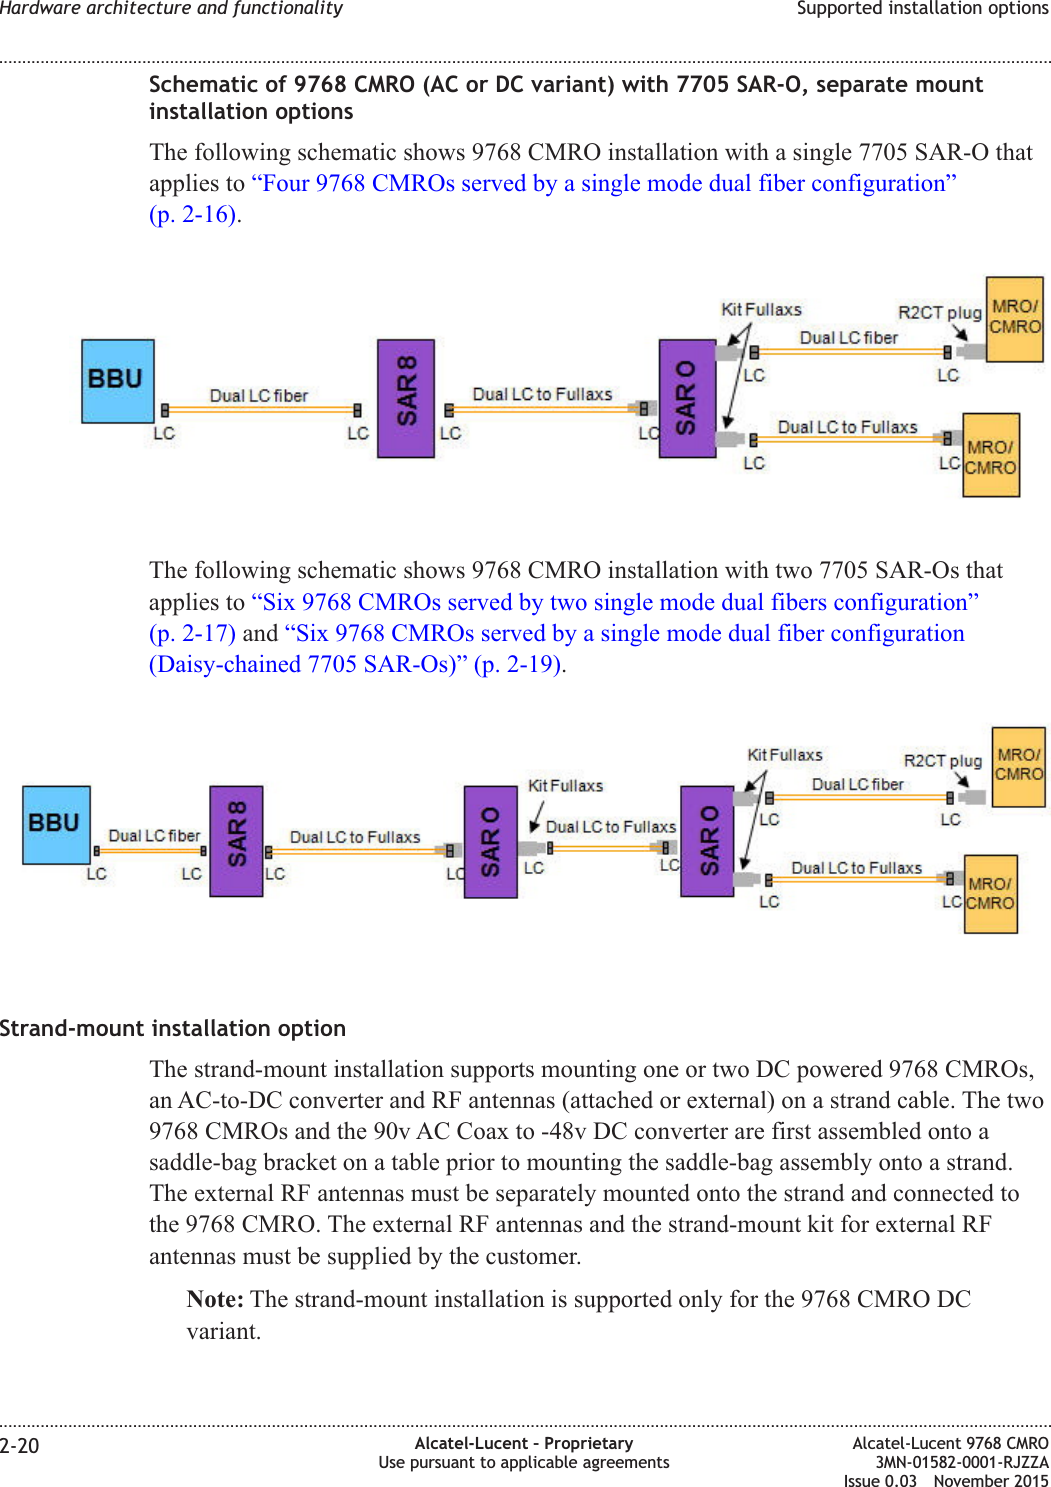 Schematic of 9768 CMRO (AC or DC variant) with 7705 SAR-O, separate mountinstallation optionsThe following schematic shows 9768 CMRO installation with a single 7705 SAR-O thatapplies to “Four 9768 CMROs served by a single mode dual fiber configuration”(p. 2-16).The following schematic shows 9768 CMRO installation with two 7705 SAR-Os thatapplies to “Six 9768 CMROs served by two single mode dual fibers configuration”(p. 2-17) and “Six 9768 CMROs served by a single mode dual fiber configuration(Daisy-chained 7705 SAR-Os)” (p. 2-19).Strand-mount installation optionThe strand-mount installation supports mounting one or two DC powered 9768 CMROs,an AC-to-DC converter and RF antennas (attached or external) on a strand cable. The two9768 CMROs and the 90v AC Coax to -48v DC converter are first assembled onto asaddle-bag bracket on a table prior to mounting the saddle-bag assembly onto a strand.The external RF antennas must be separately mounted onto the strand and connected tothe 9768 CMRO. The external RF antennas and the strand-mount kit for external RFantennas must be supplied by the customer.Note: The strand-mount installation is supported only for the 9768 CMRO DCvariant.Hardware architecture and functionality Supported installation options........................................................................................................................................................................................................................................................................................................................................................................................................................................................................2-20 Alcatel-Lucent – ProprietaryUse pursuant to applicable agreementsAlcatel-Lucent 9768 CMRO3MN-01582-0001-RJZZAIssue 0.03 November 2015DRAFTDRAFT